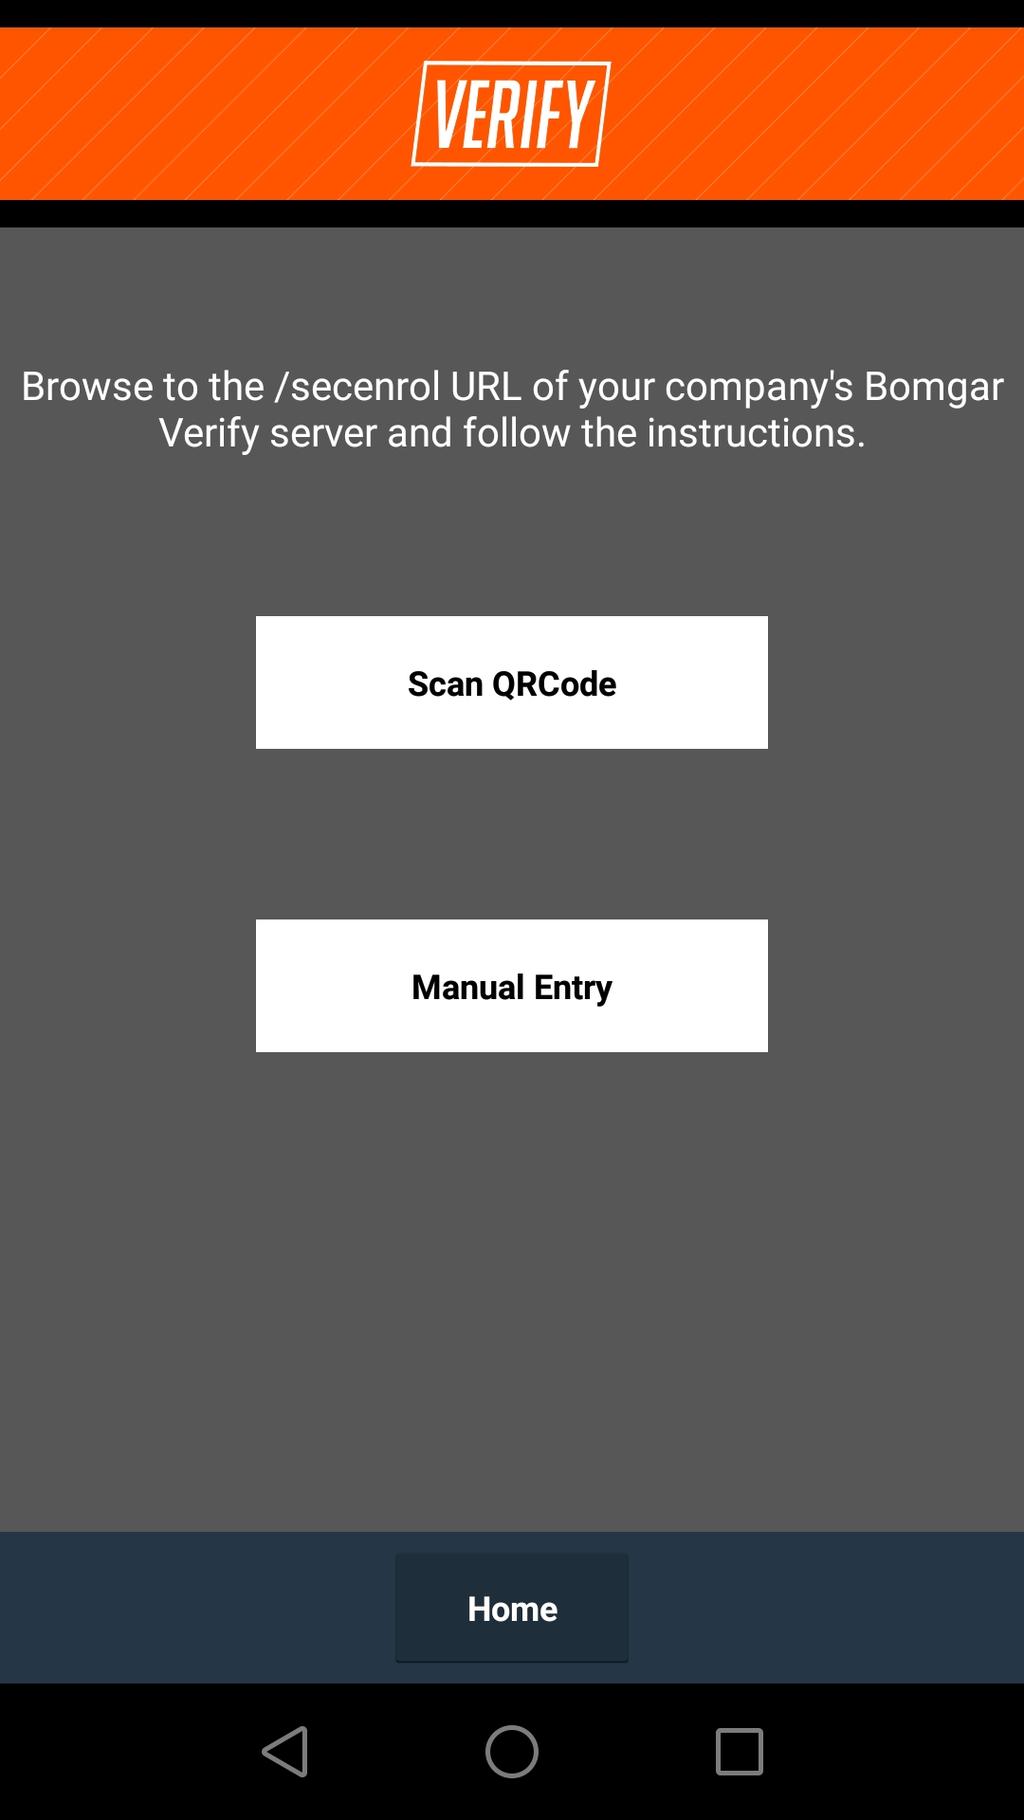 3. Follow your app's procedure to scan the code. On the Verify app, tap Add and then Scan QRCode to scan the code shown on the computer screen.